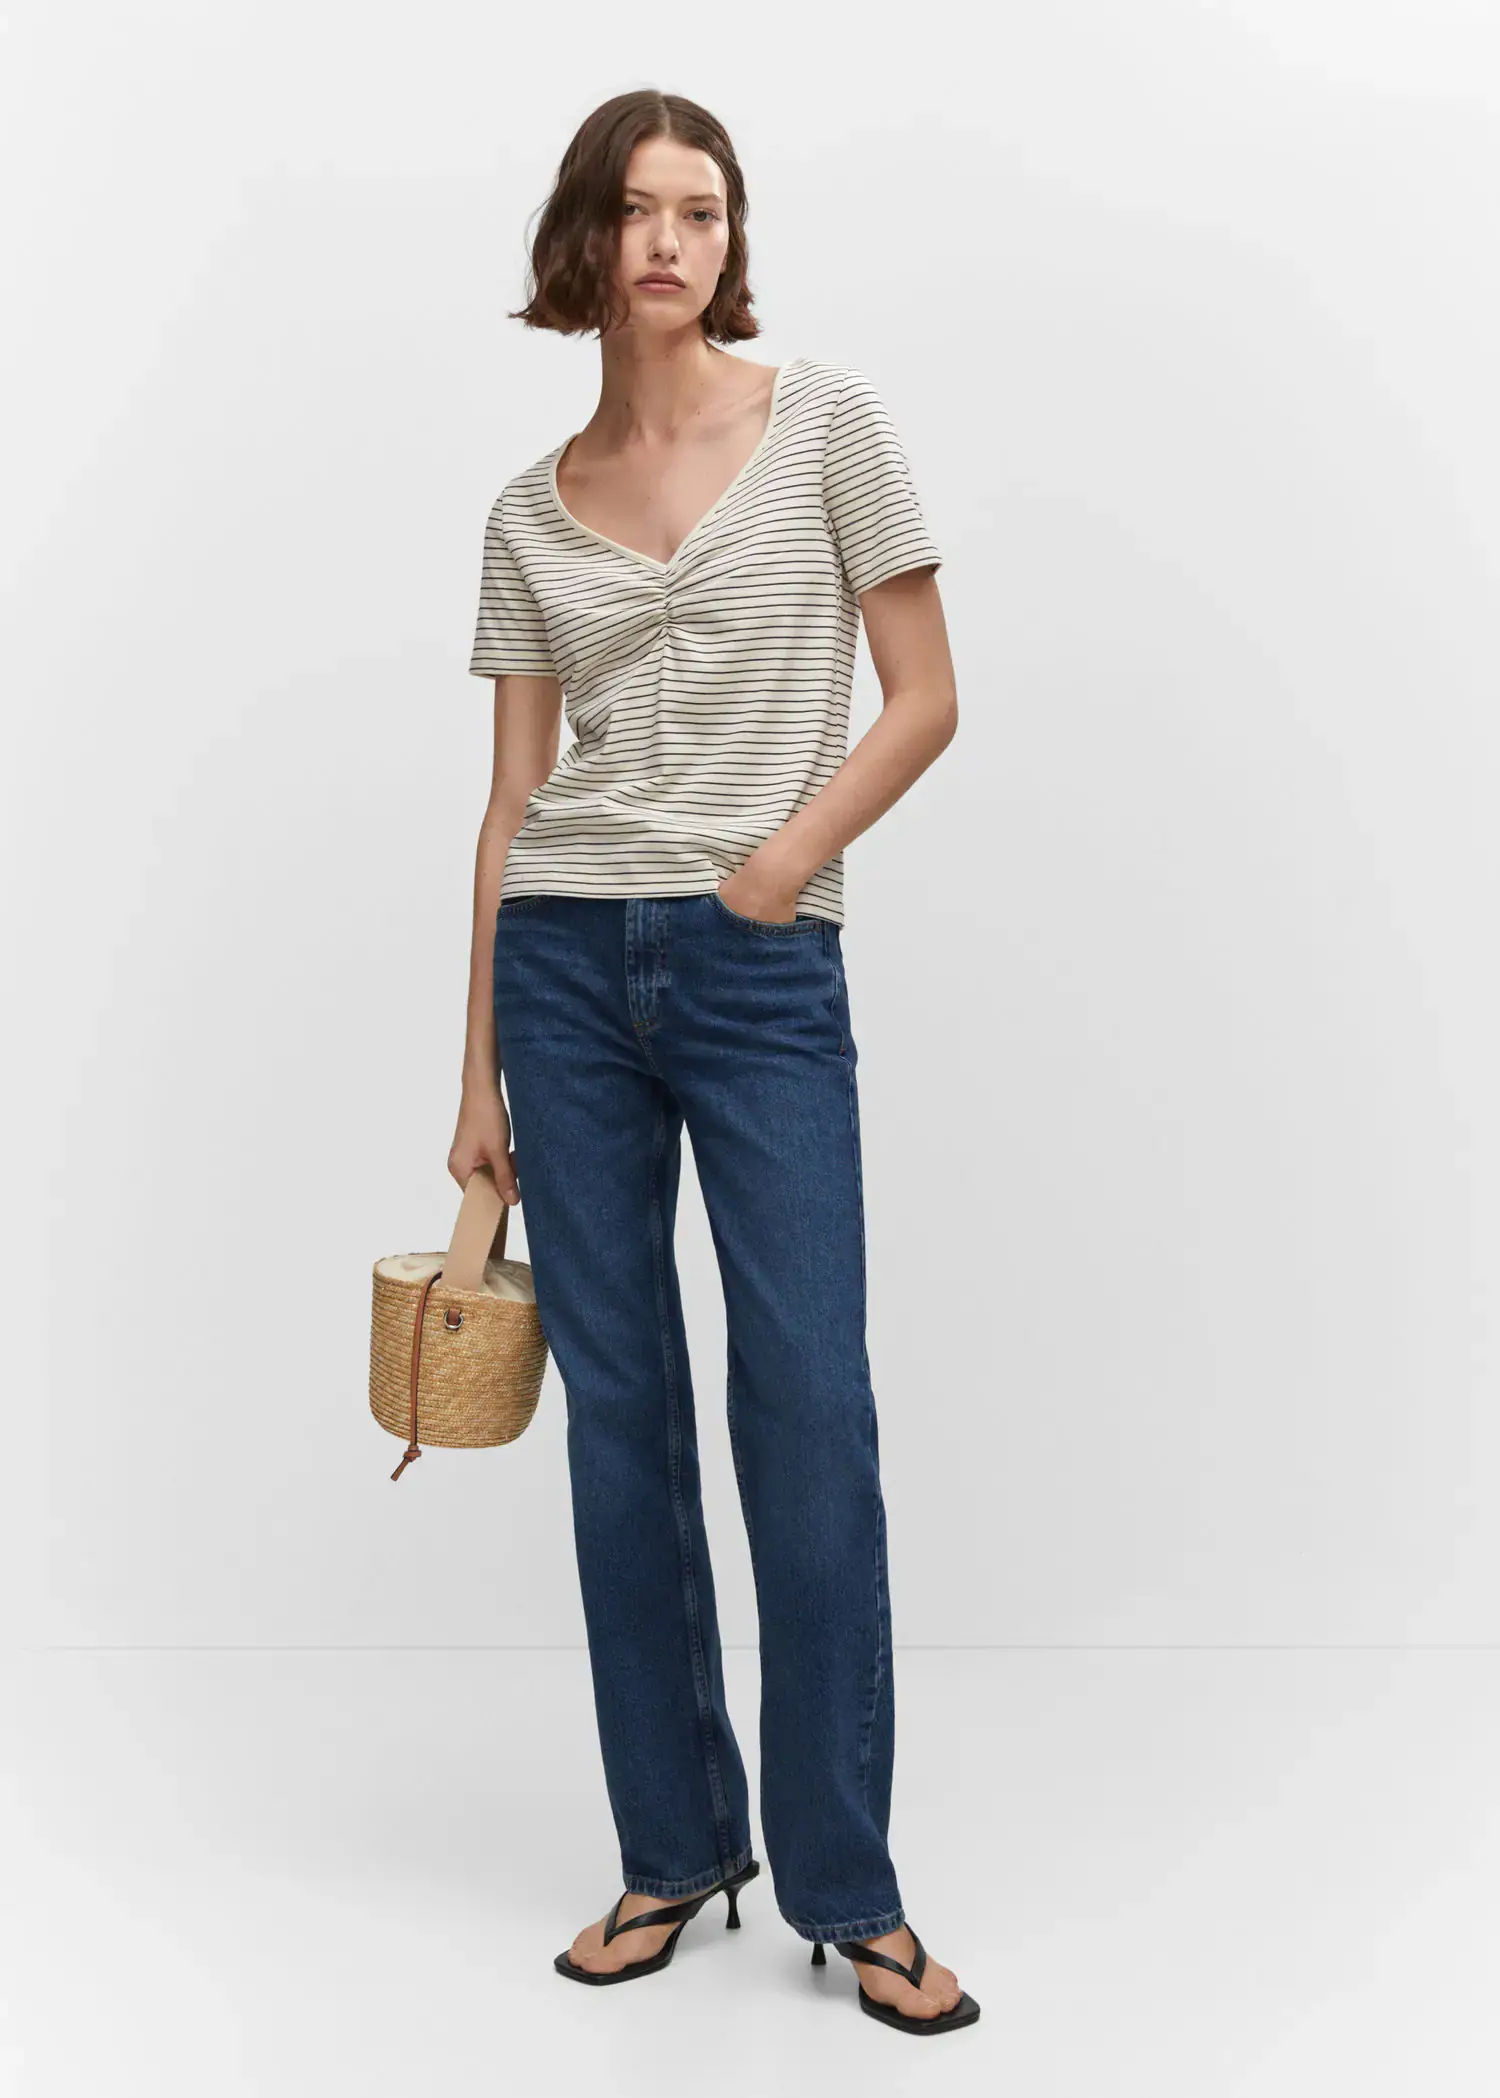 Mango Cotton t-shirt with pucker detail. a woman wearing jeans and a striped shirt. 